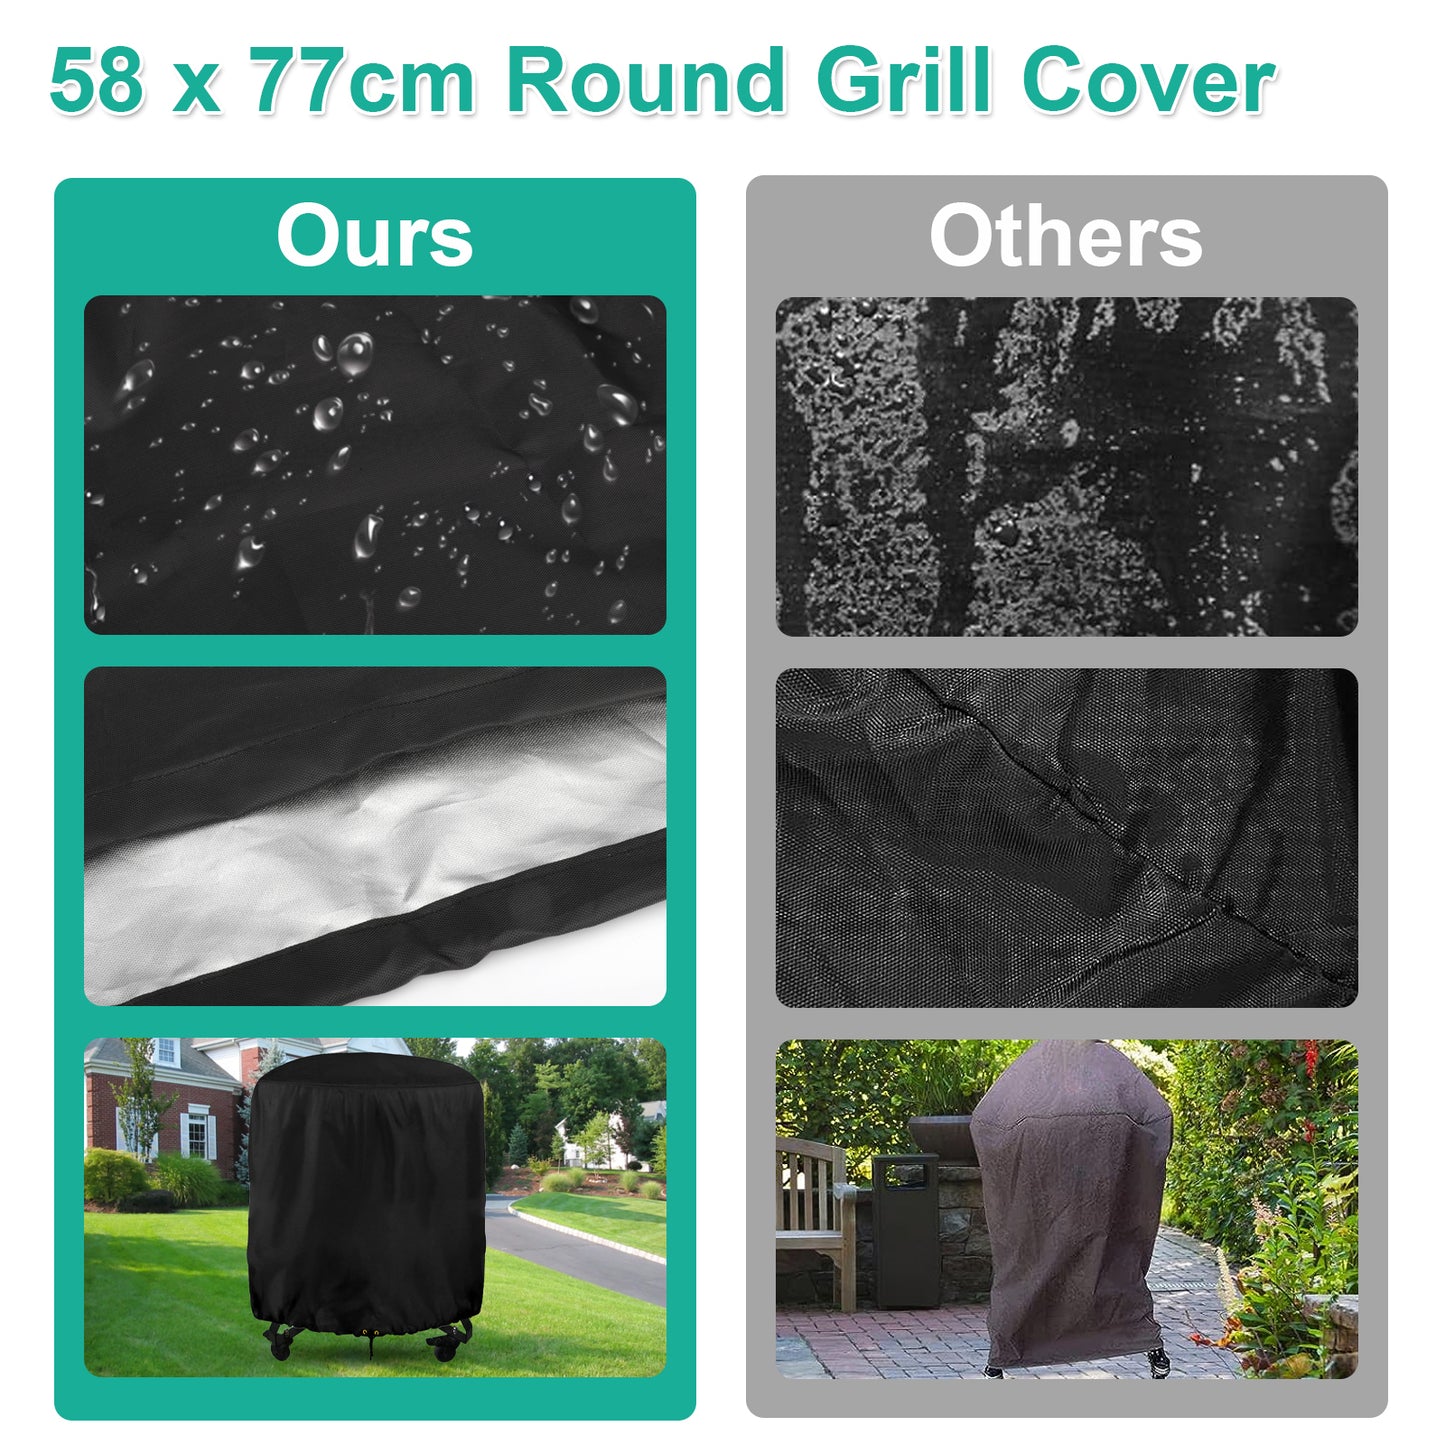 58cmx77cm Round Grill Cover - Waterproof, UV Resistant, Adjustable Cord Lock - All-Season Protection